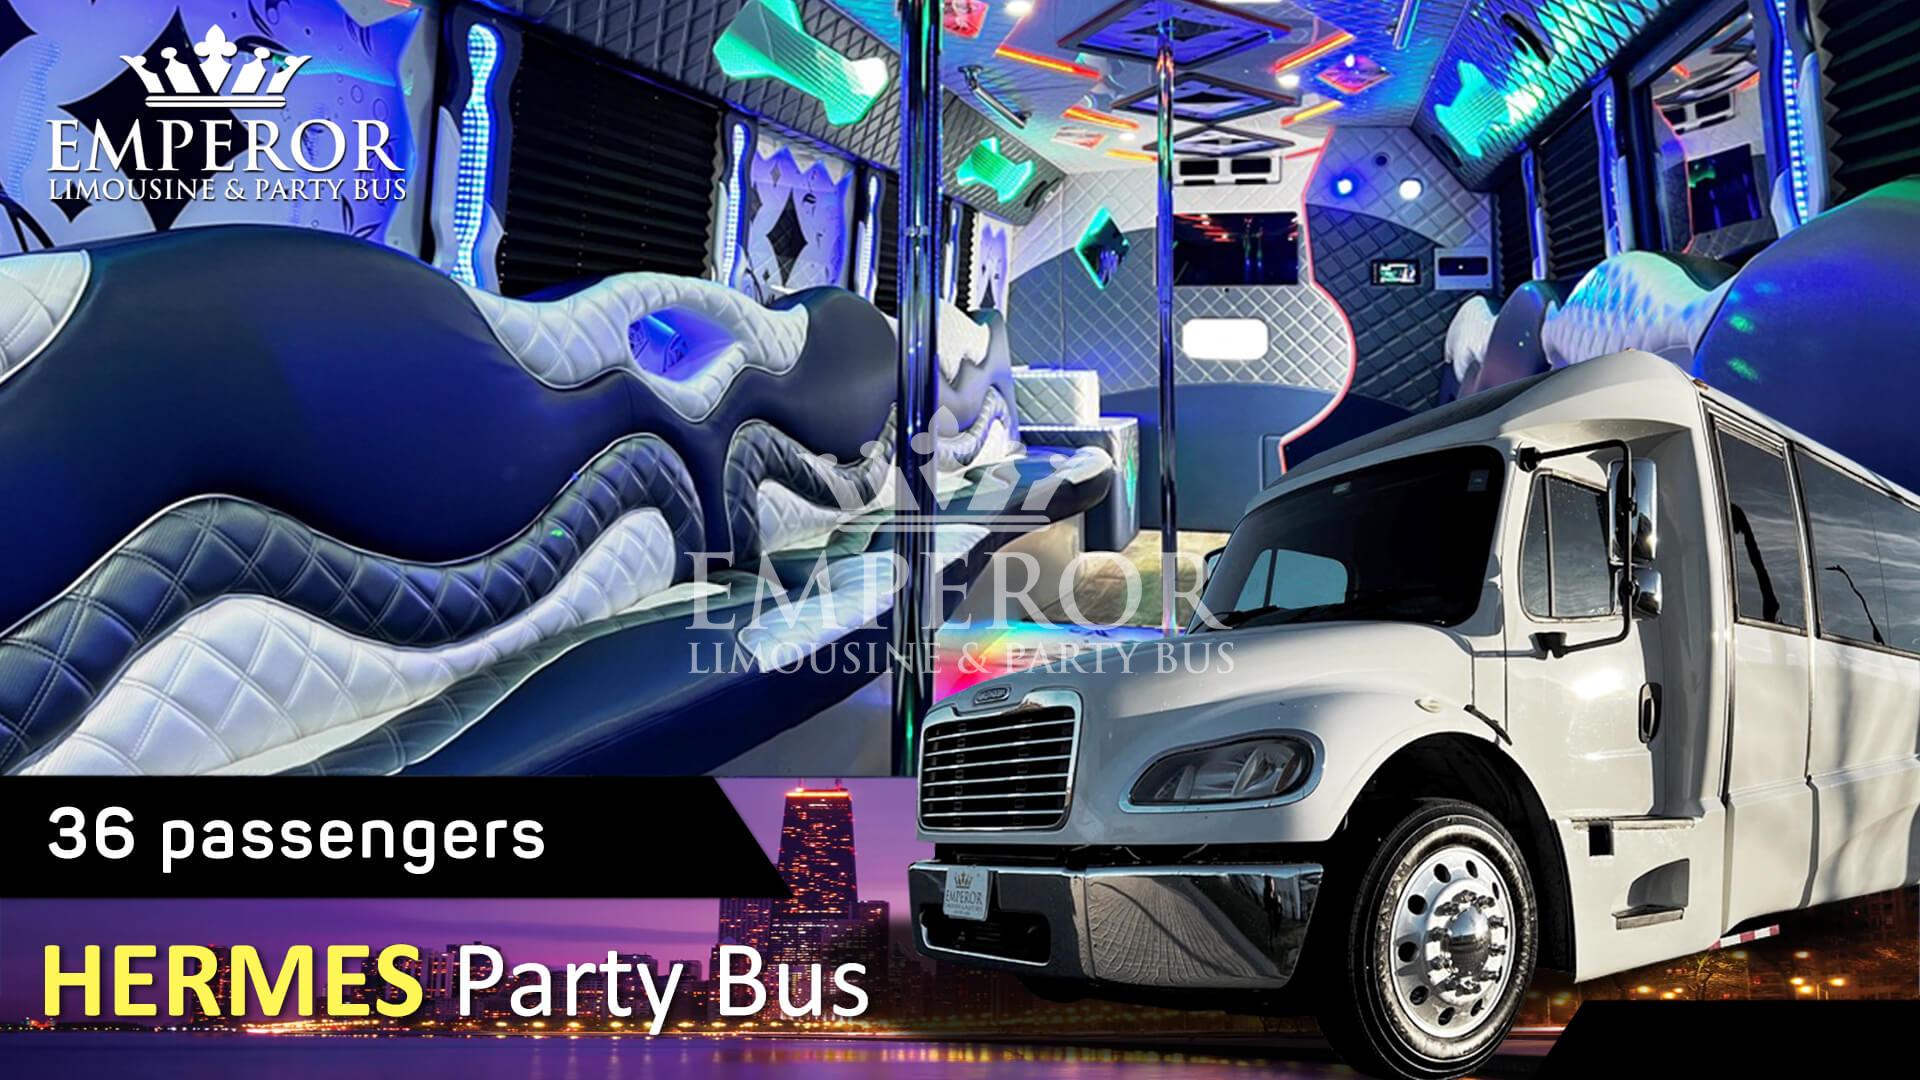 Party bus rental in Addison, IL - Hermes Edition